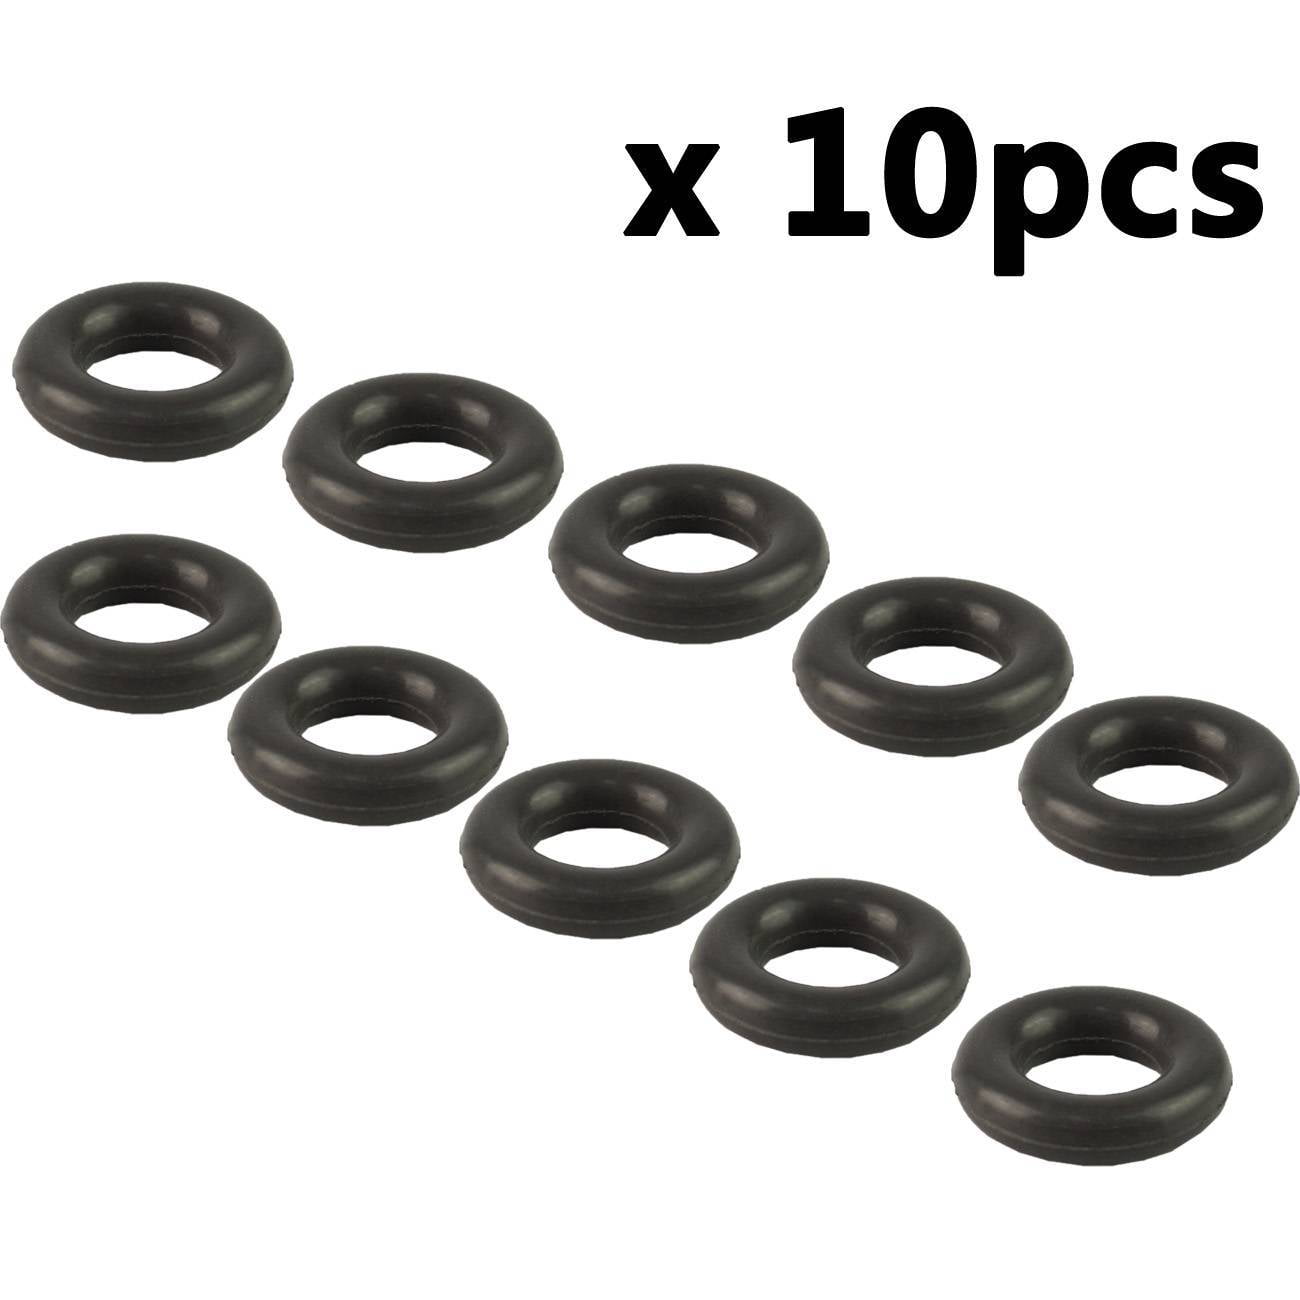 10pcs Engine Fuel Injector O-Ring Seal For Mercedes R170 W202 0199971348